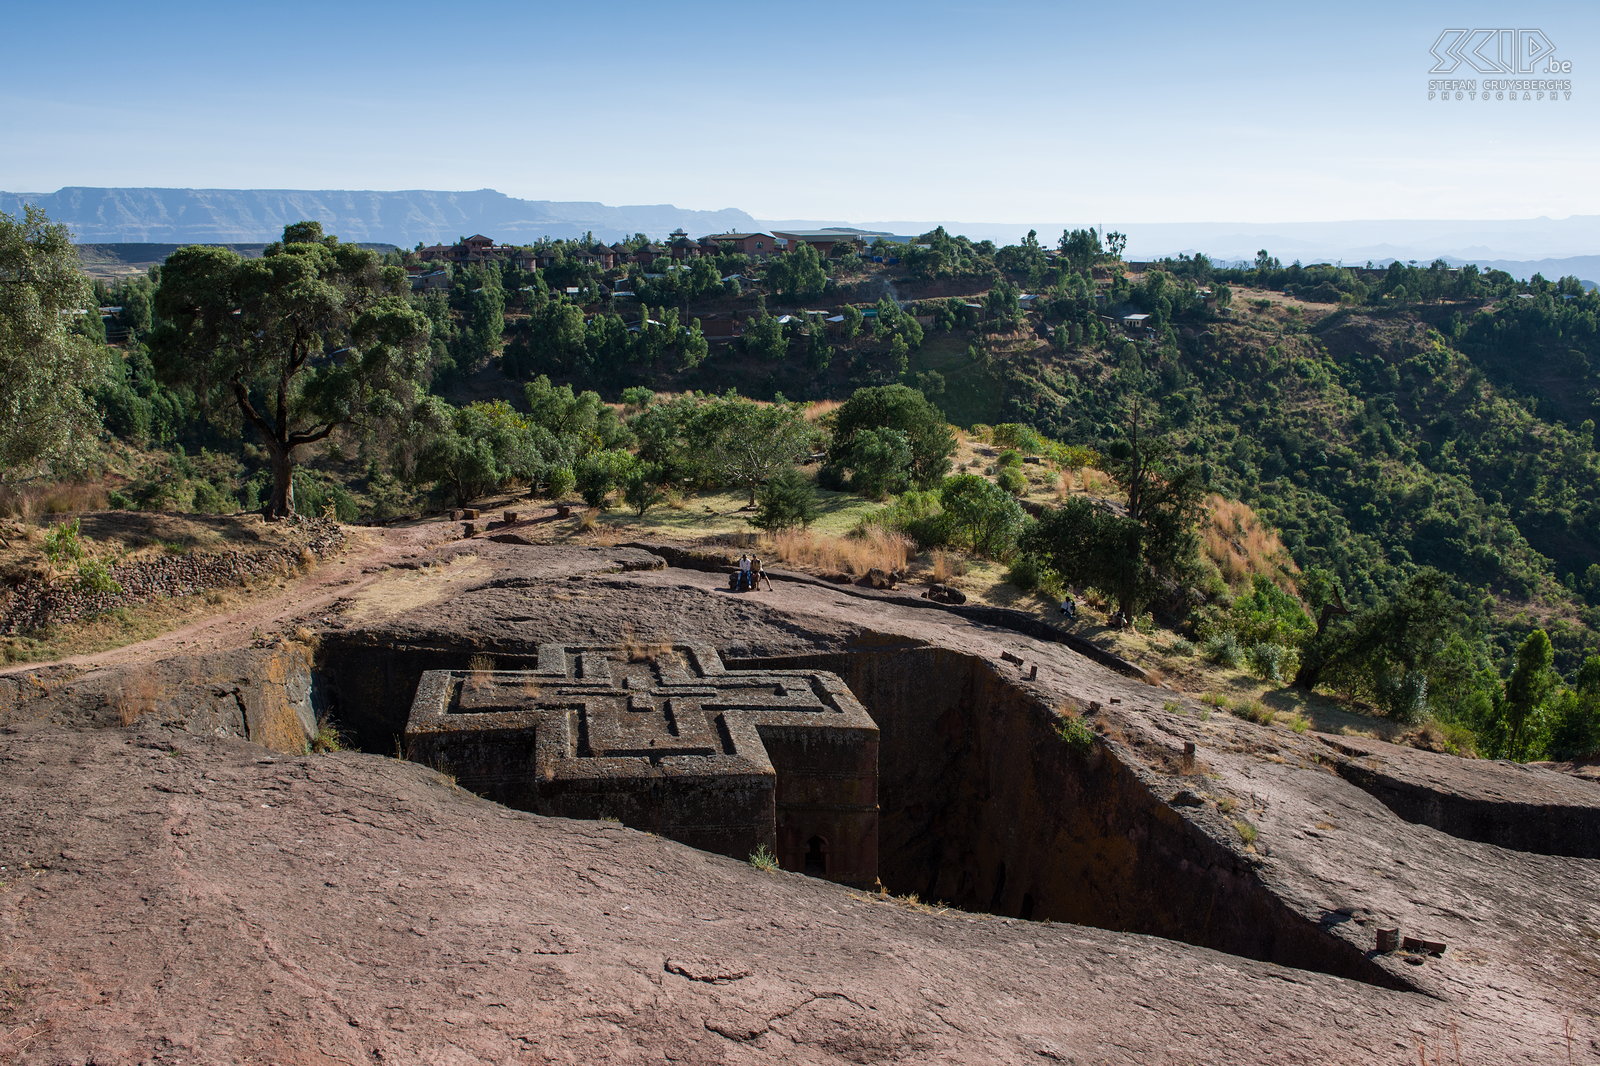 Lalibela - Bete Giyorgis church The most beautiful and famous church is Bete Giyorgis/Bieta Ghiorghis (Church of Saint George). This isolated monolith is about 15m high. Stefan Cruysberghs